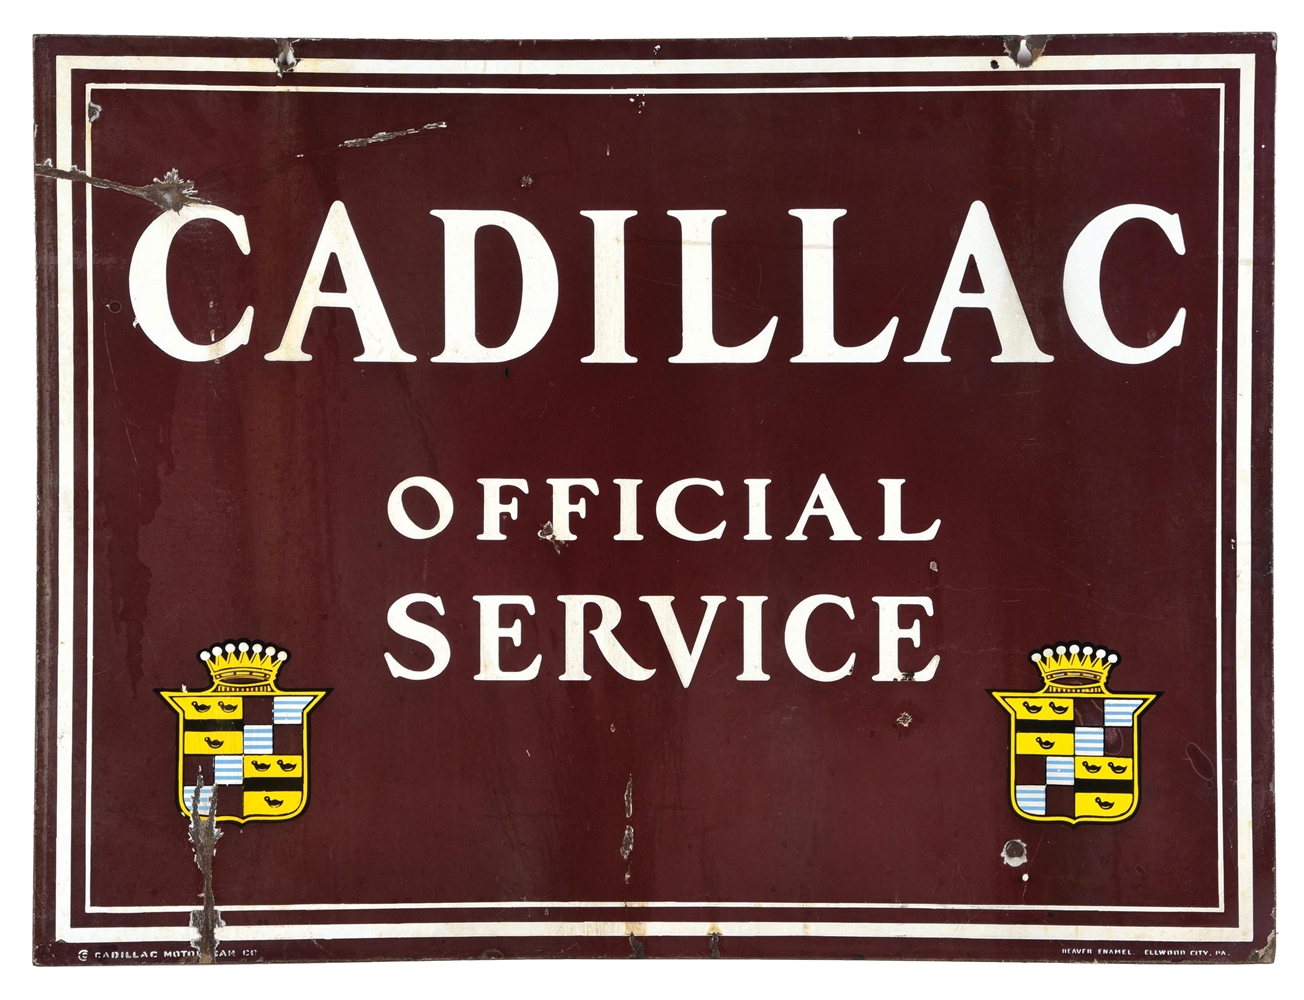 PORCELAIN CADILLAC OFFICIAL SERVICE SIGN W/ LOGO GRAPHICS.